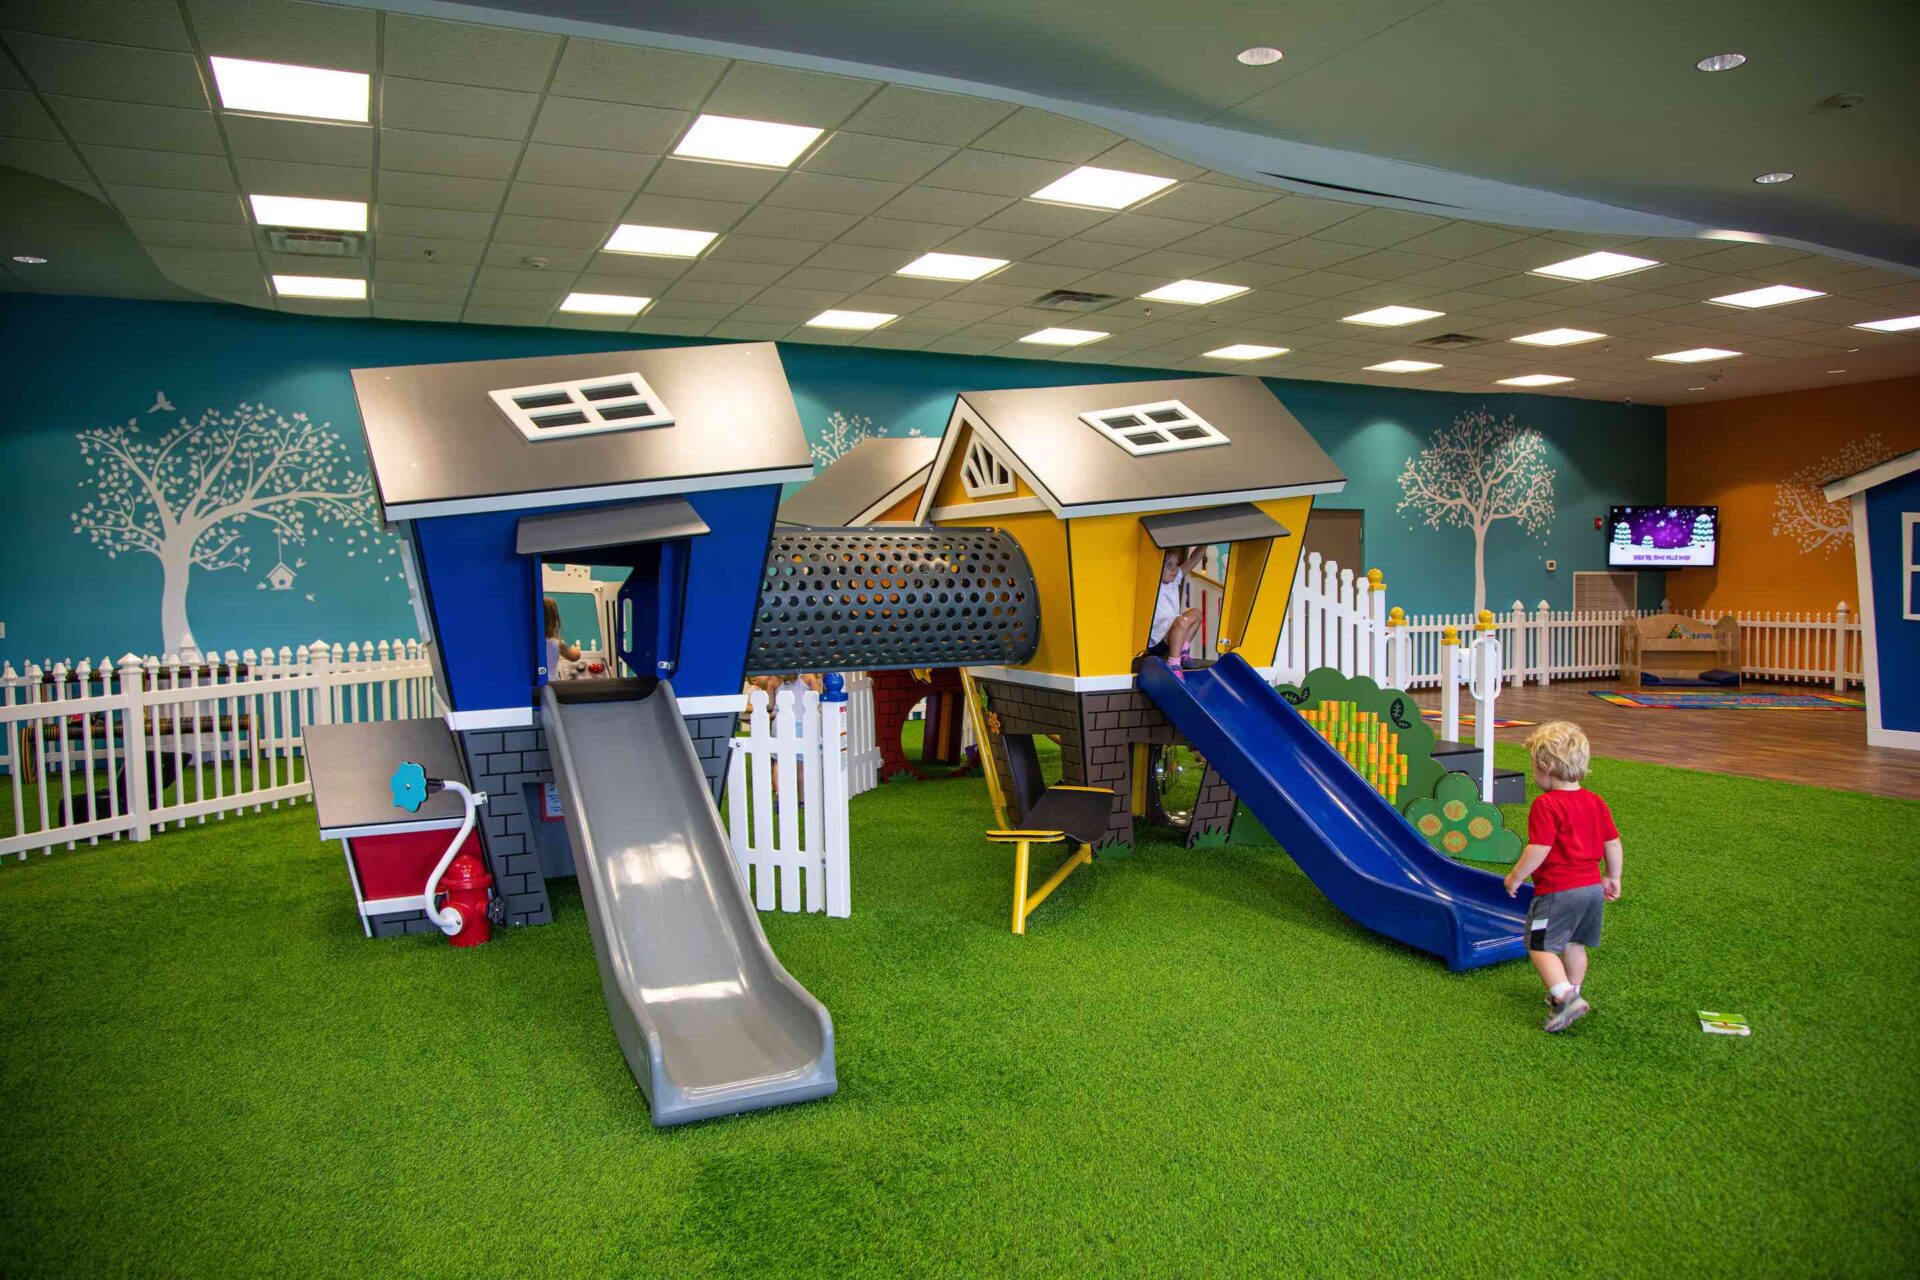 A colorful indoor playground with a green floor resembling grass, featuring slides, a playhouse, and a child about to climb a slide.